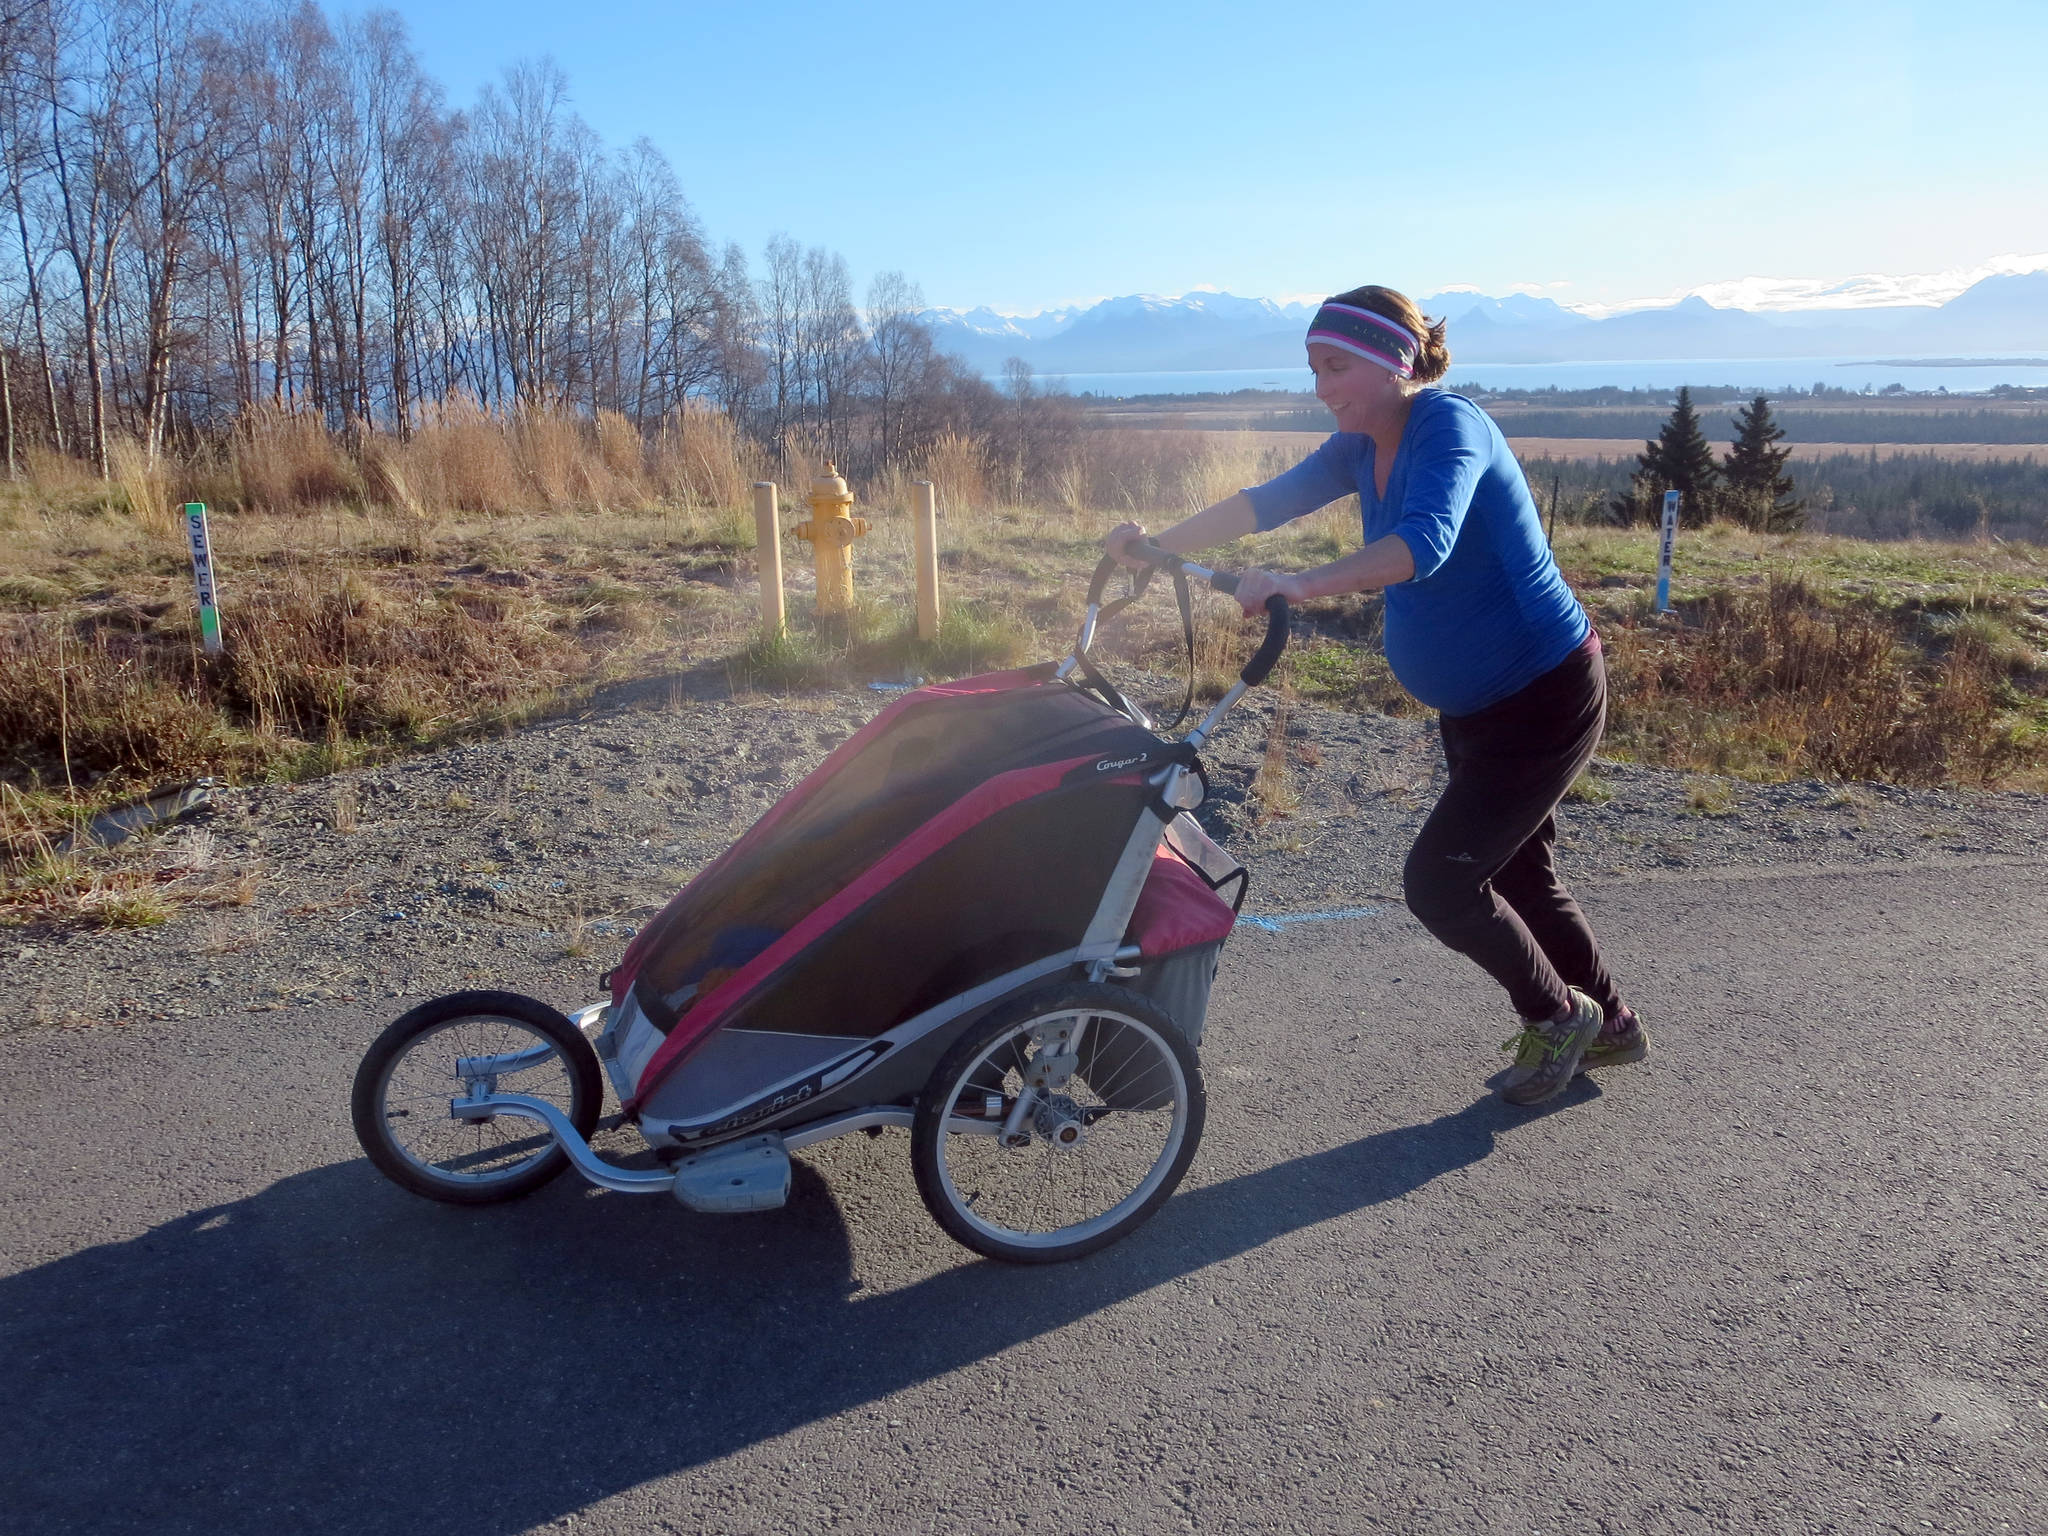 Annie Ridgely trains in 2013 while pregnant, and pushing two children in a stroller up a road at Stream Hill Park. (Photo by Megan Corazza)